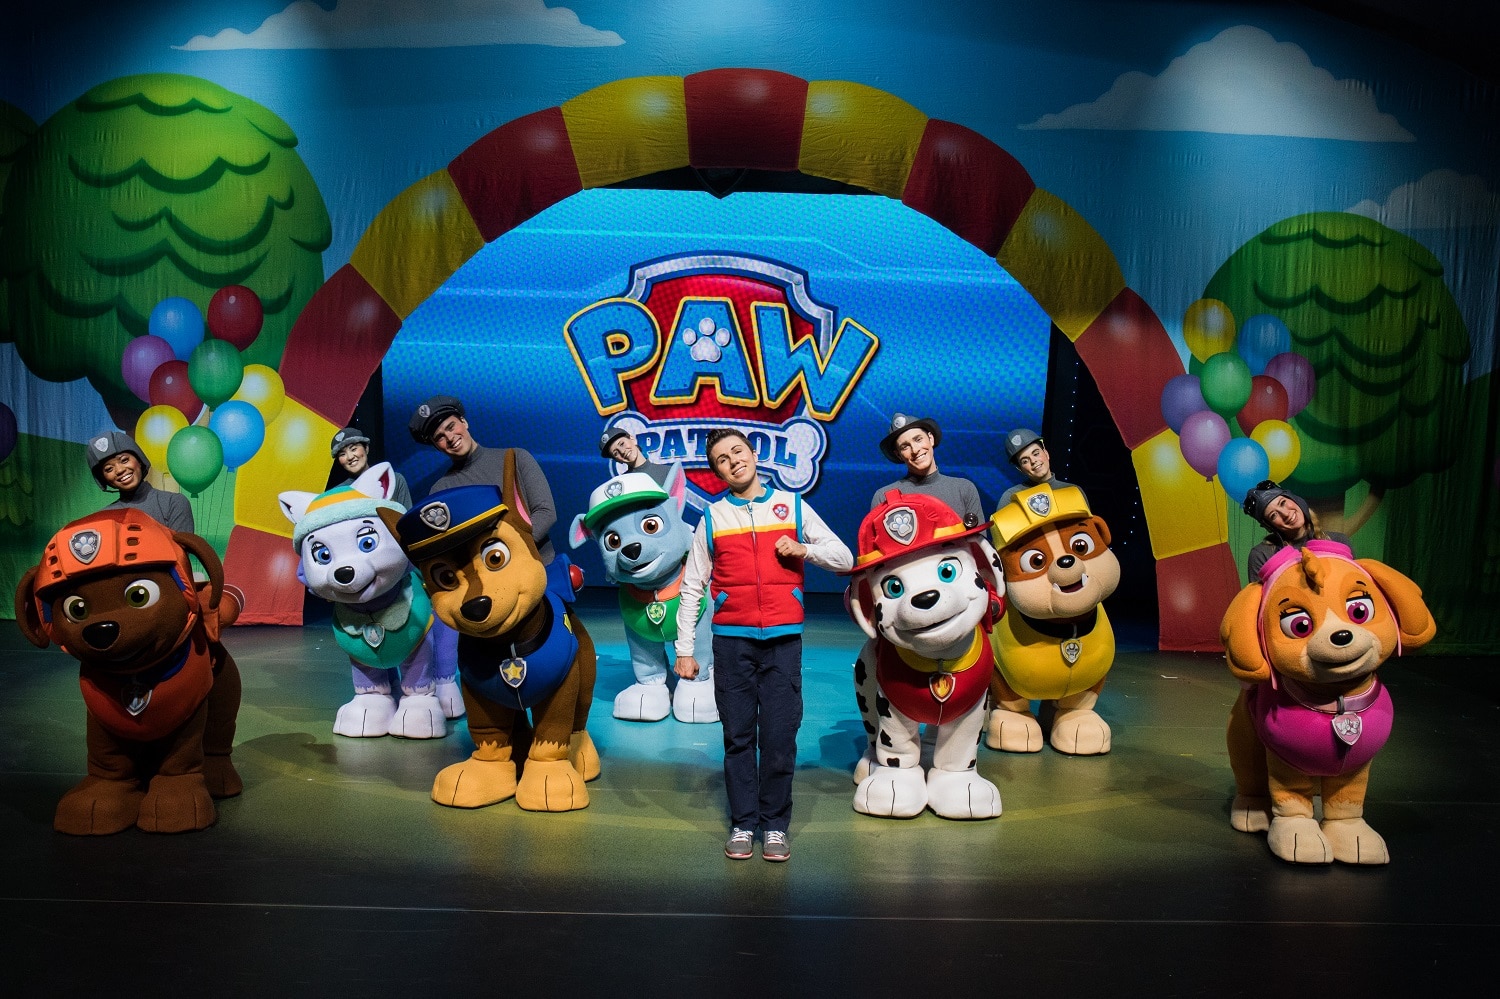 Paw Patrol Live Live Show For Kids Of All Ages - paw patrol roblox song ids